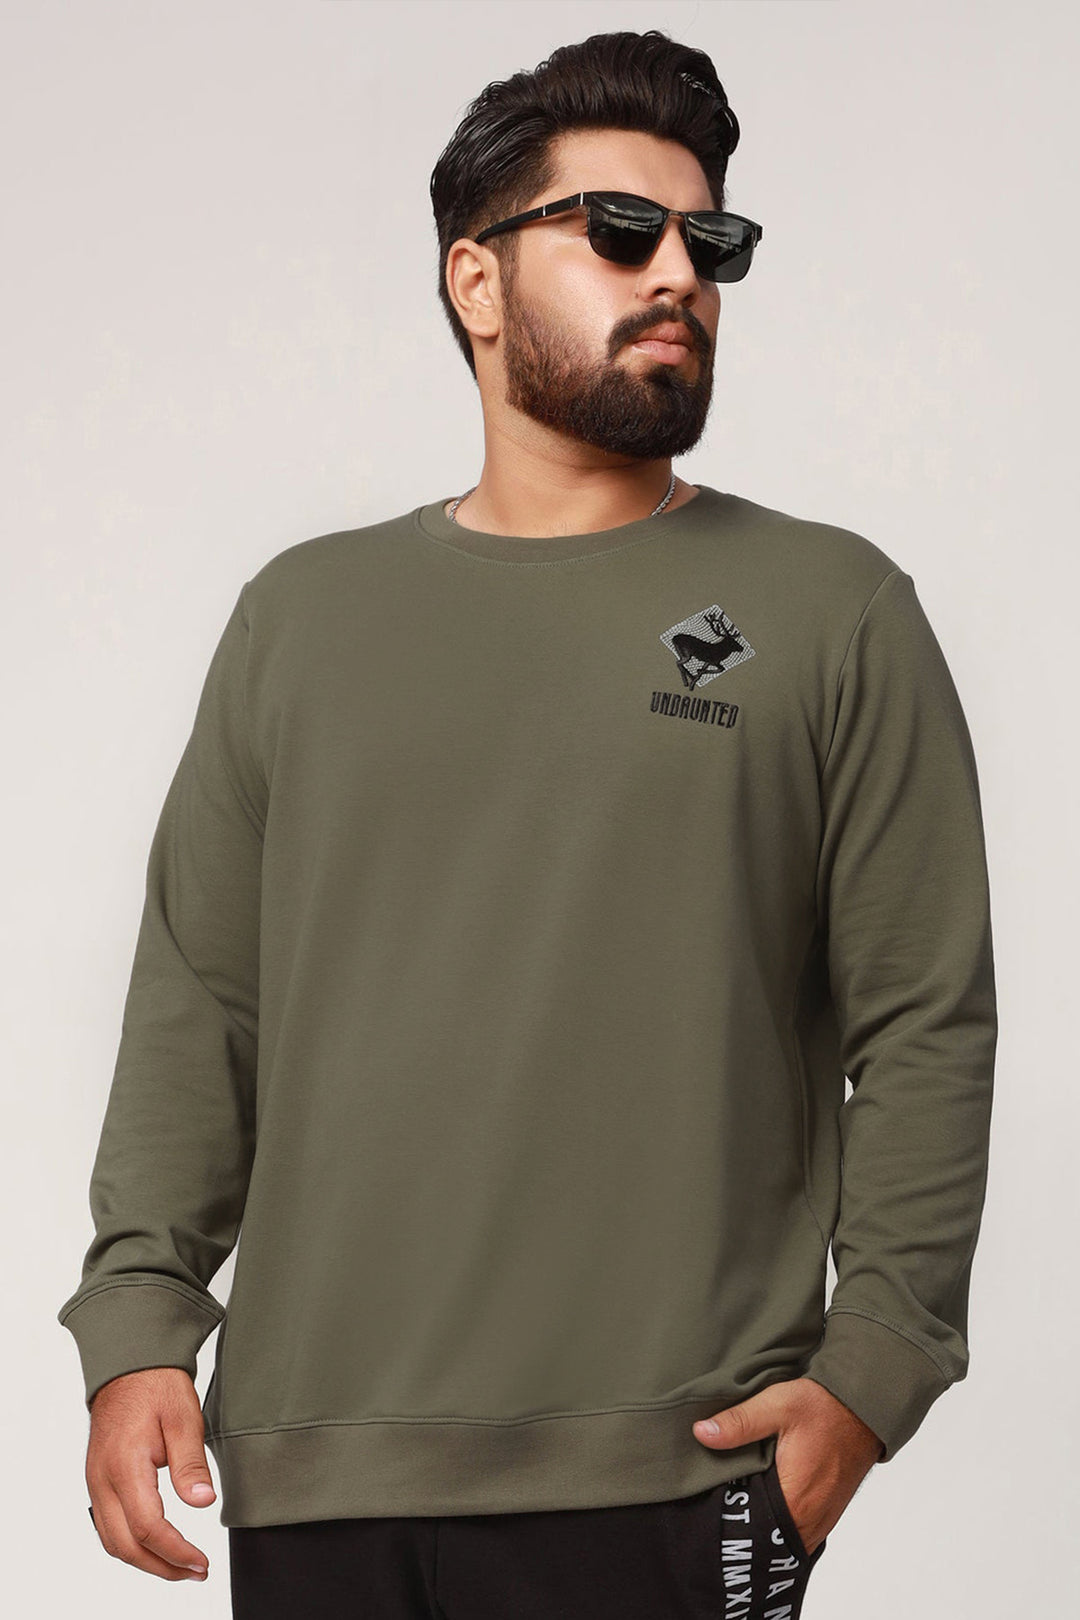 Undaunted Army Green Embroidered Sweatshirt (Plus Size) - W22 - MSW058P